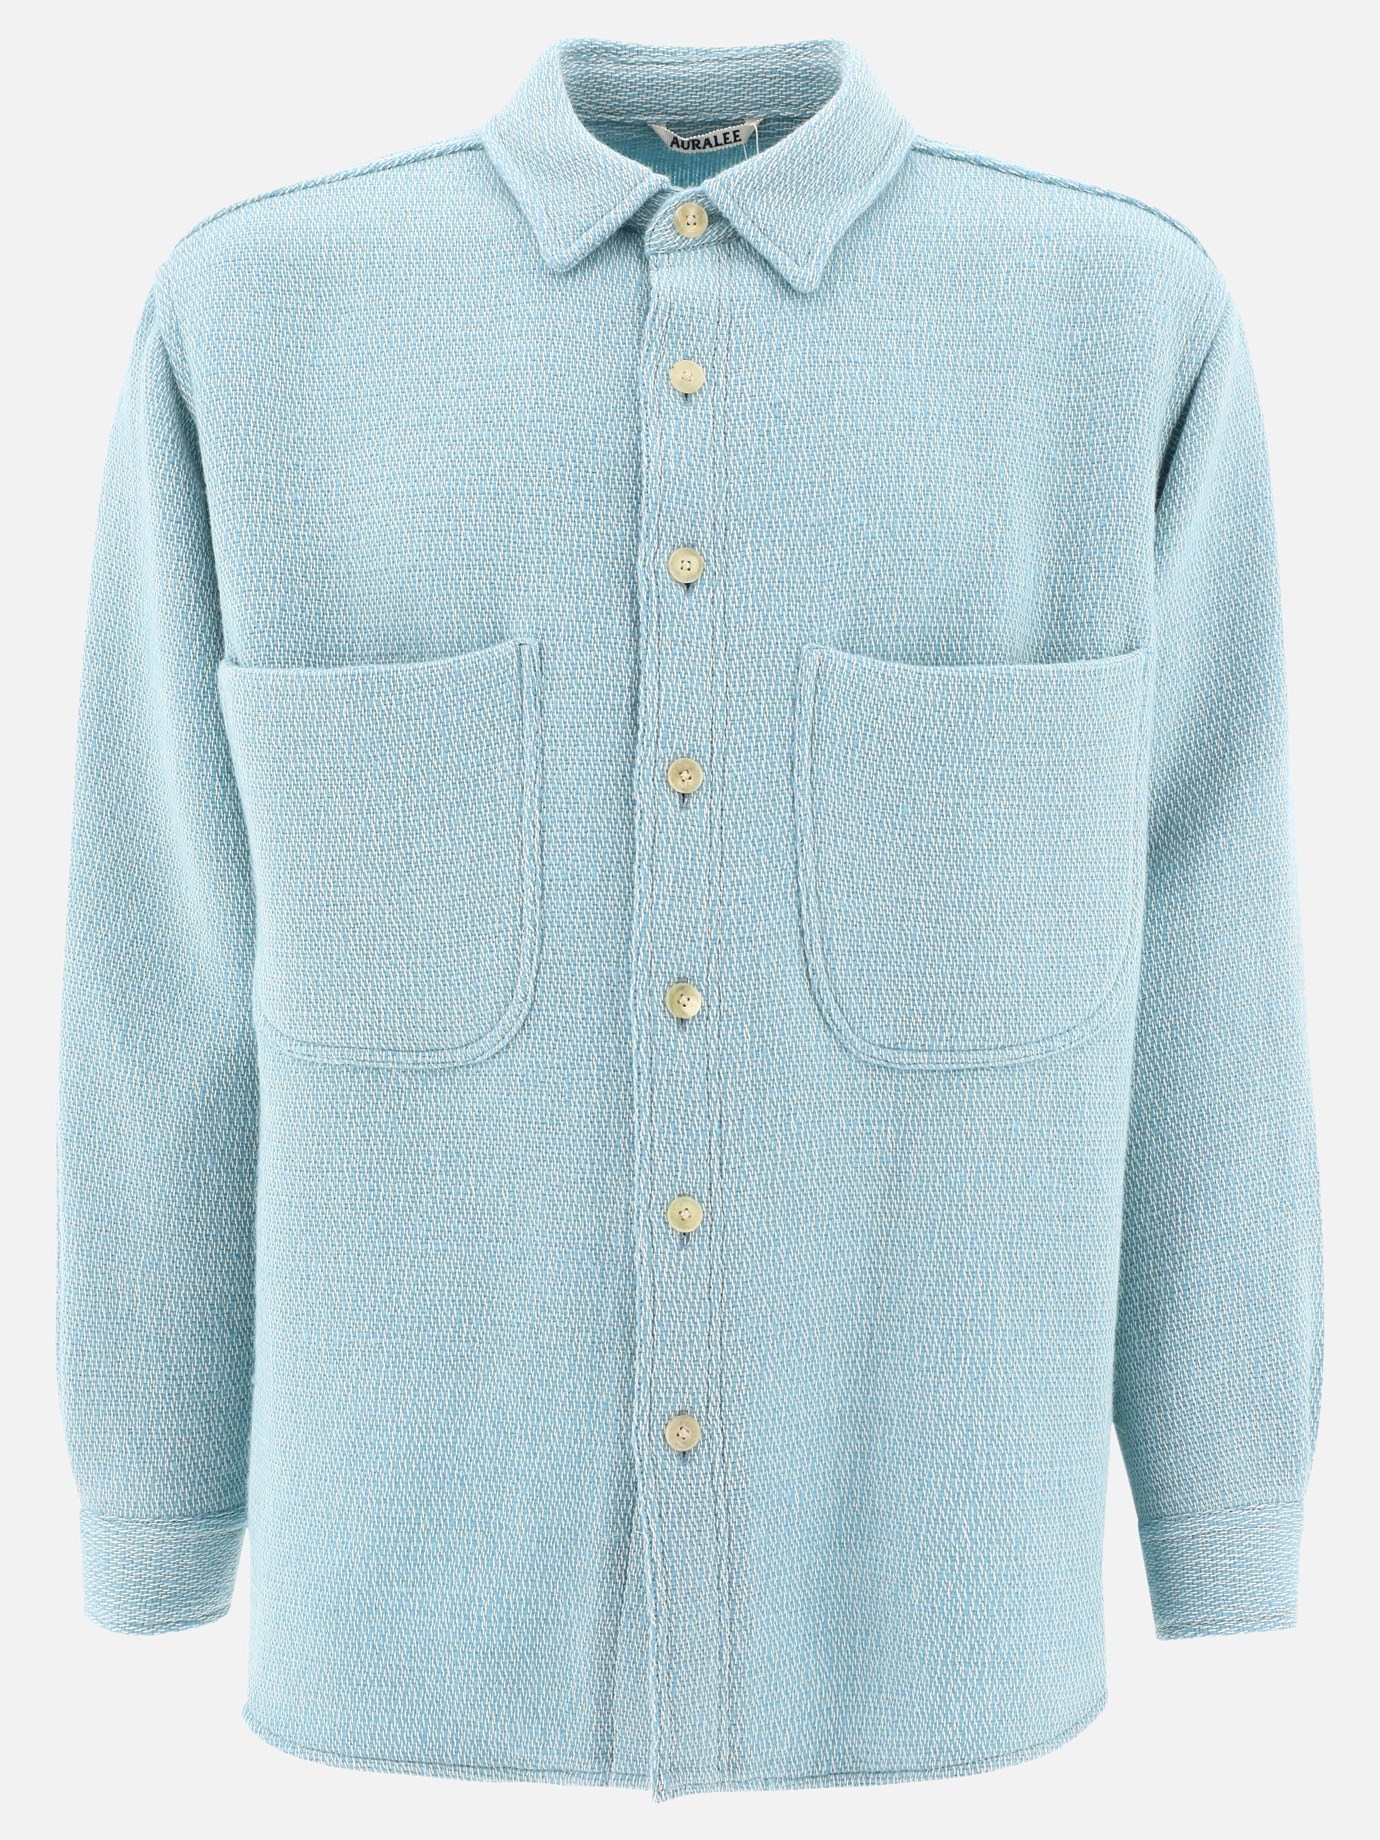 Overshirt with breast pockets